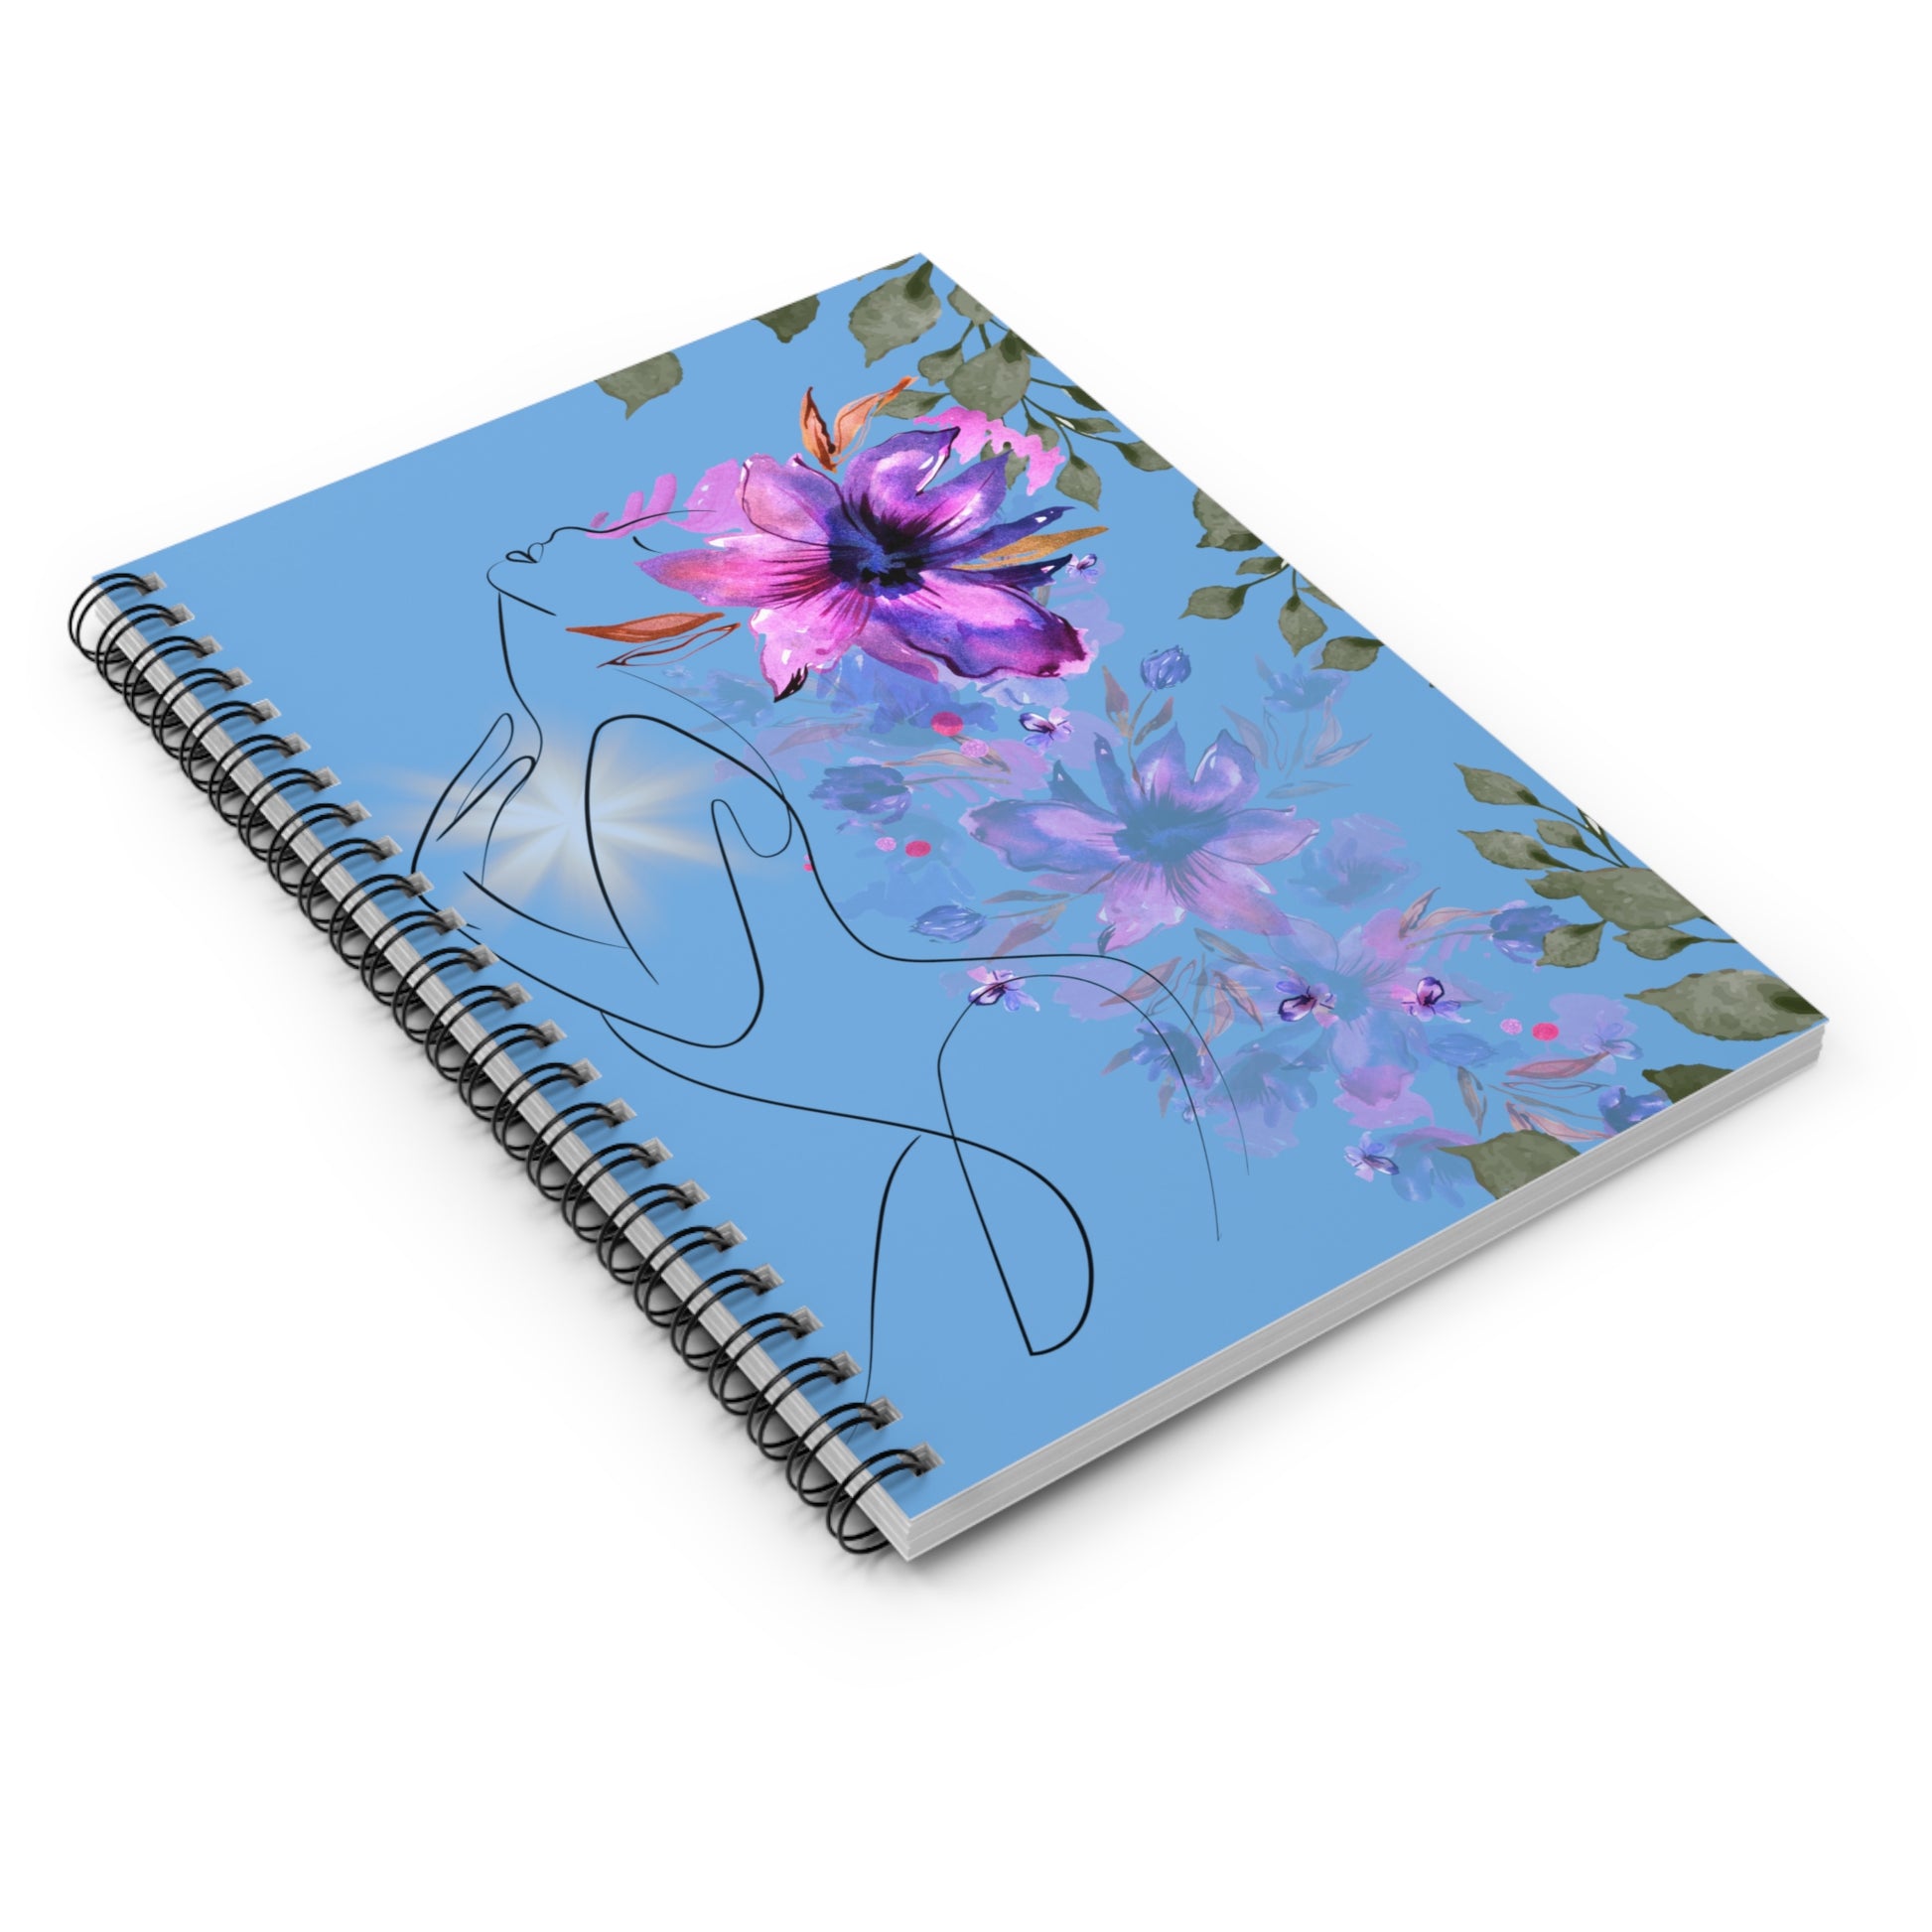 From Within: Spiral Notebook - Log Books - Journals - Diaries - and More Custom Printed by TheGlassyLass